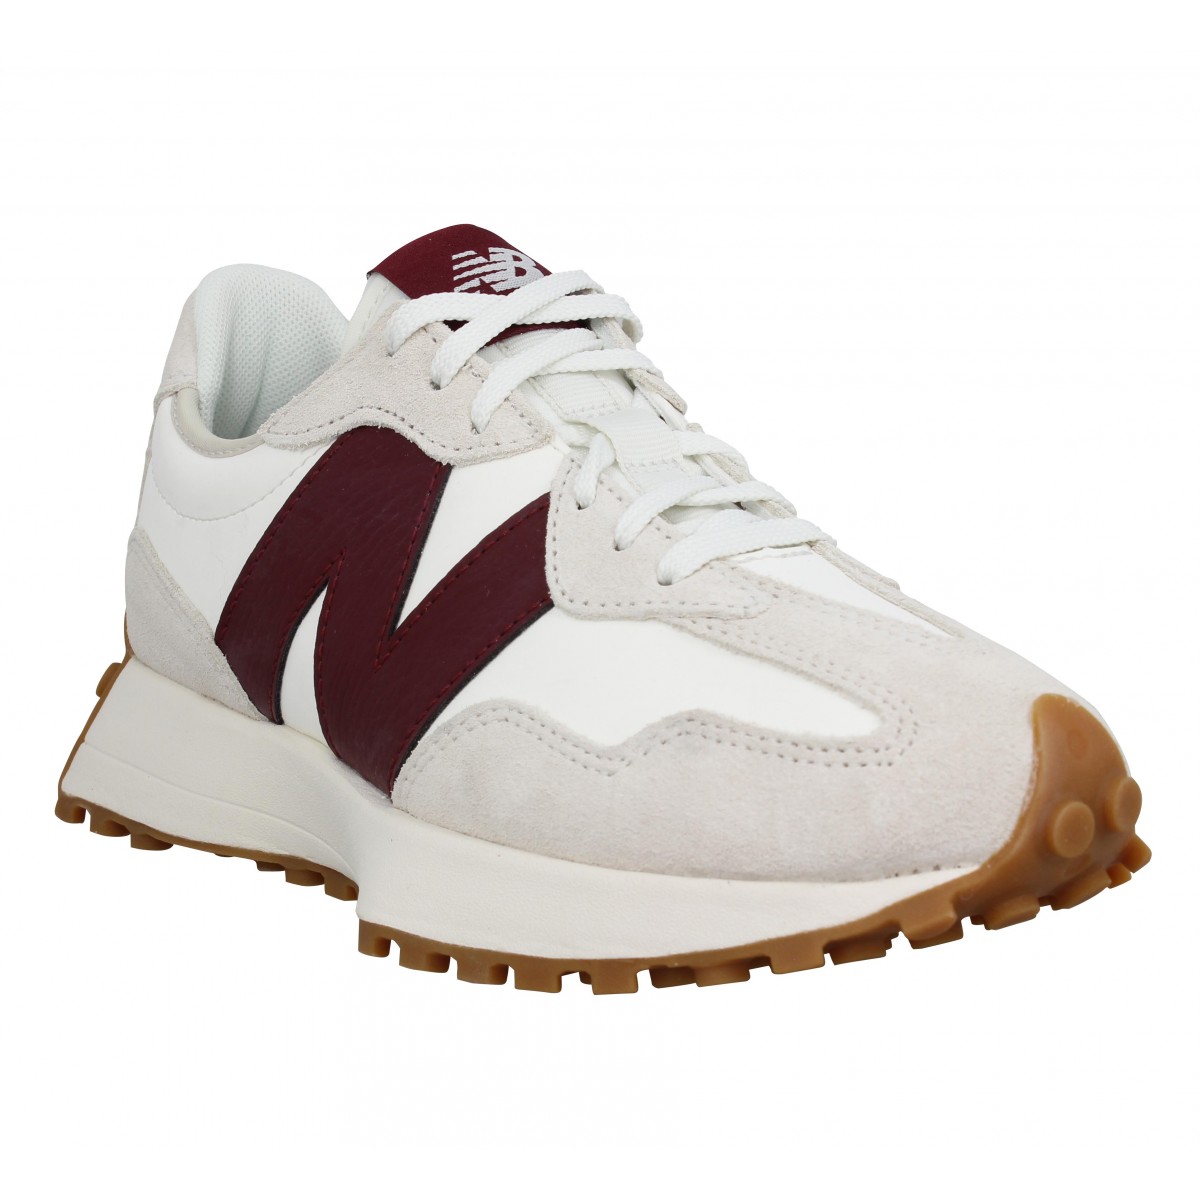 Chaussures New balance 327 cuir velours 